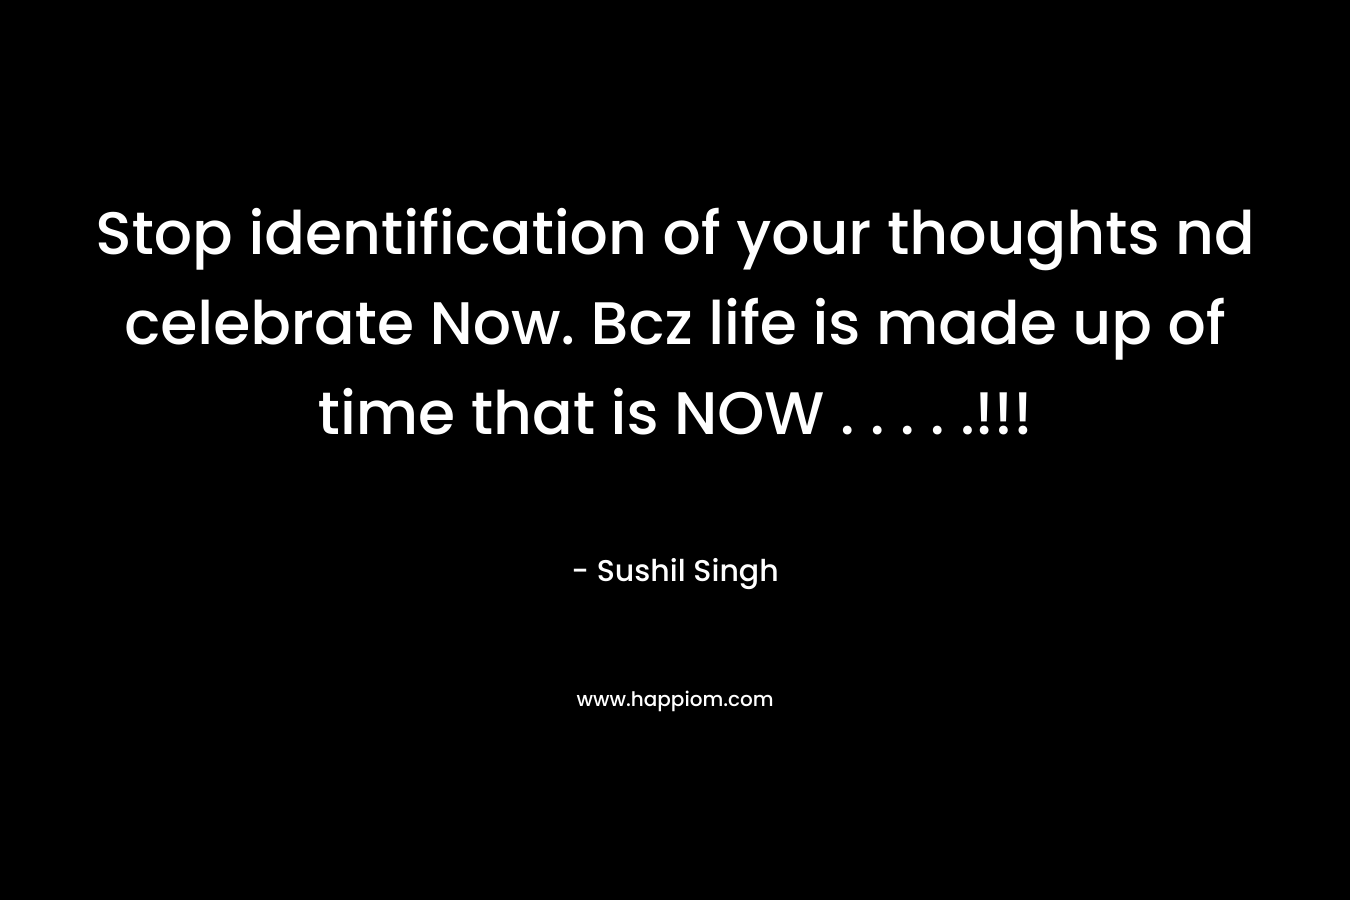 Stop identification of your thoughts nd celebrate Now. Bcz life is made up of time that is NOW . . . . .!!! – Sushil Singh